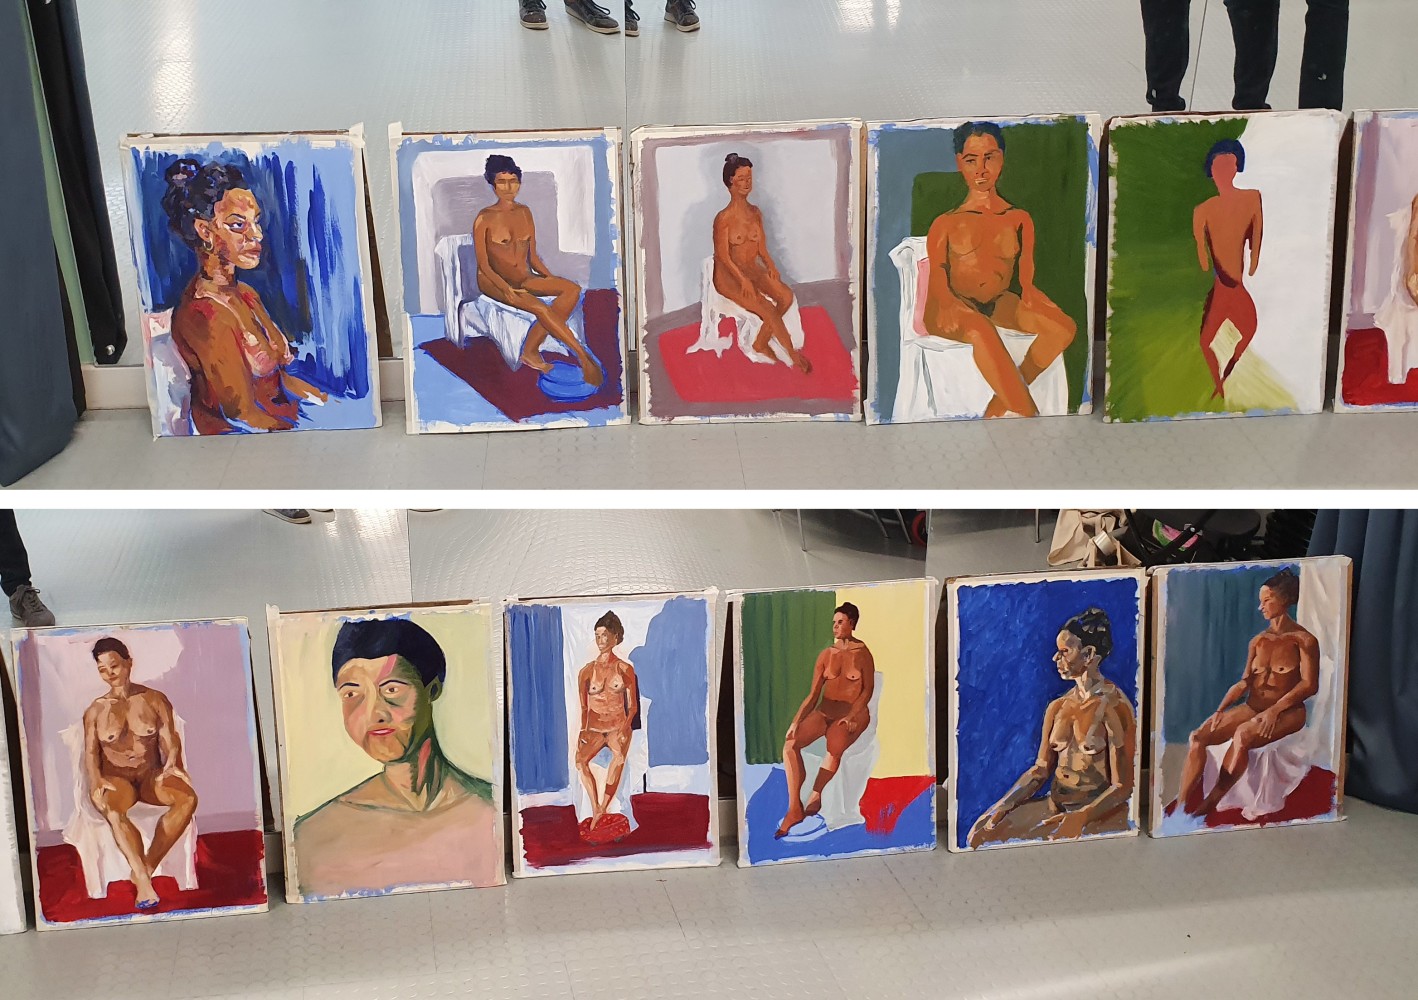 Paintings from all participants lined up